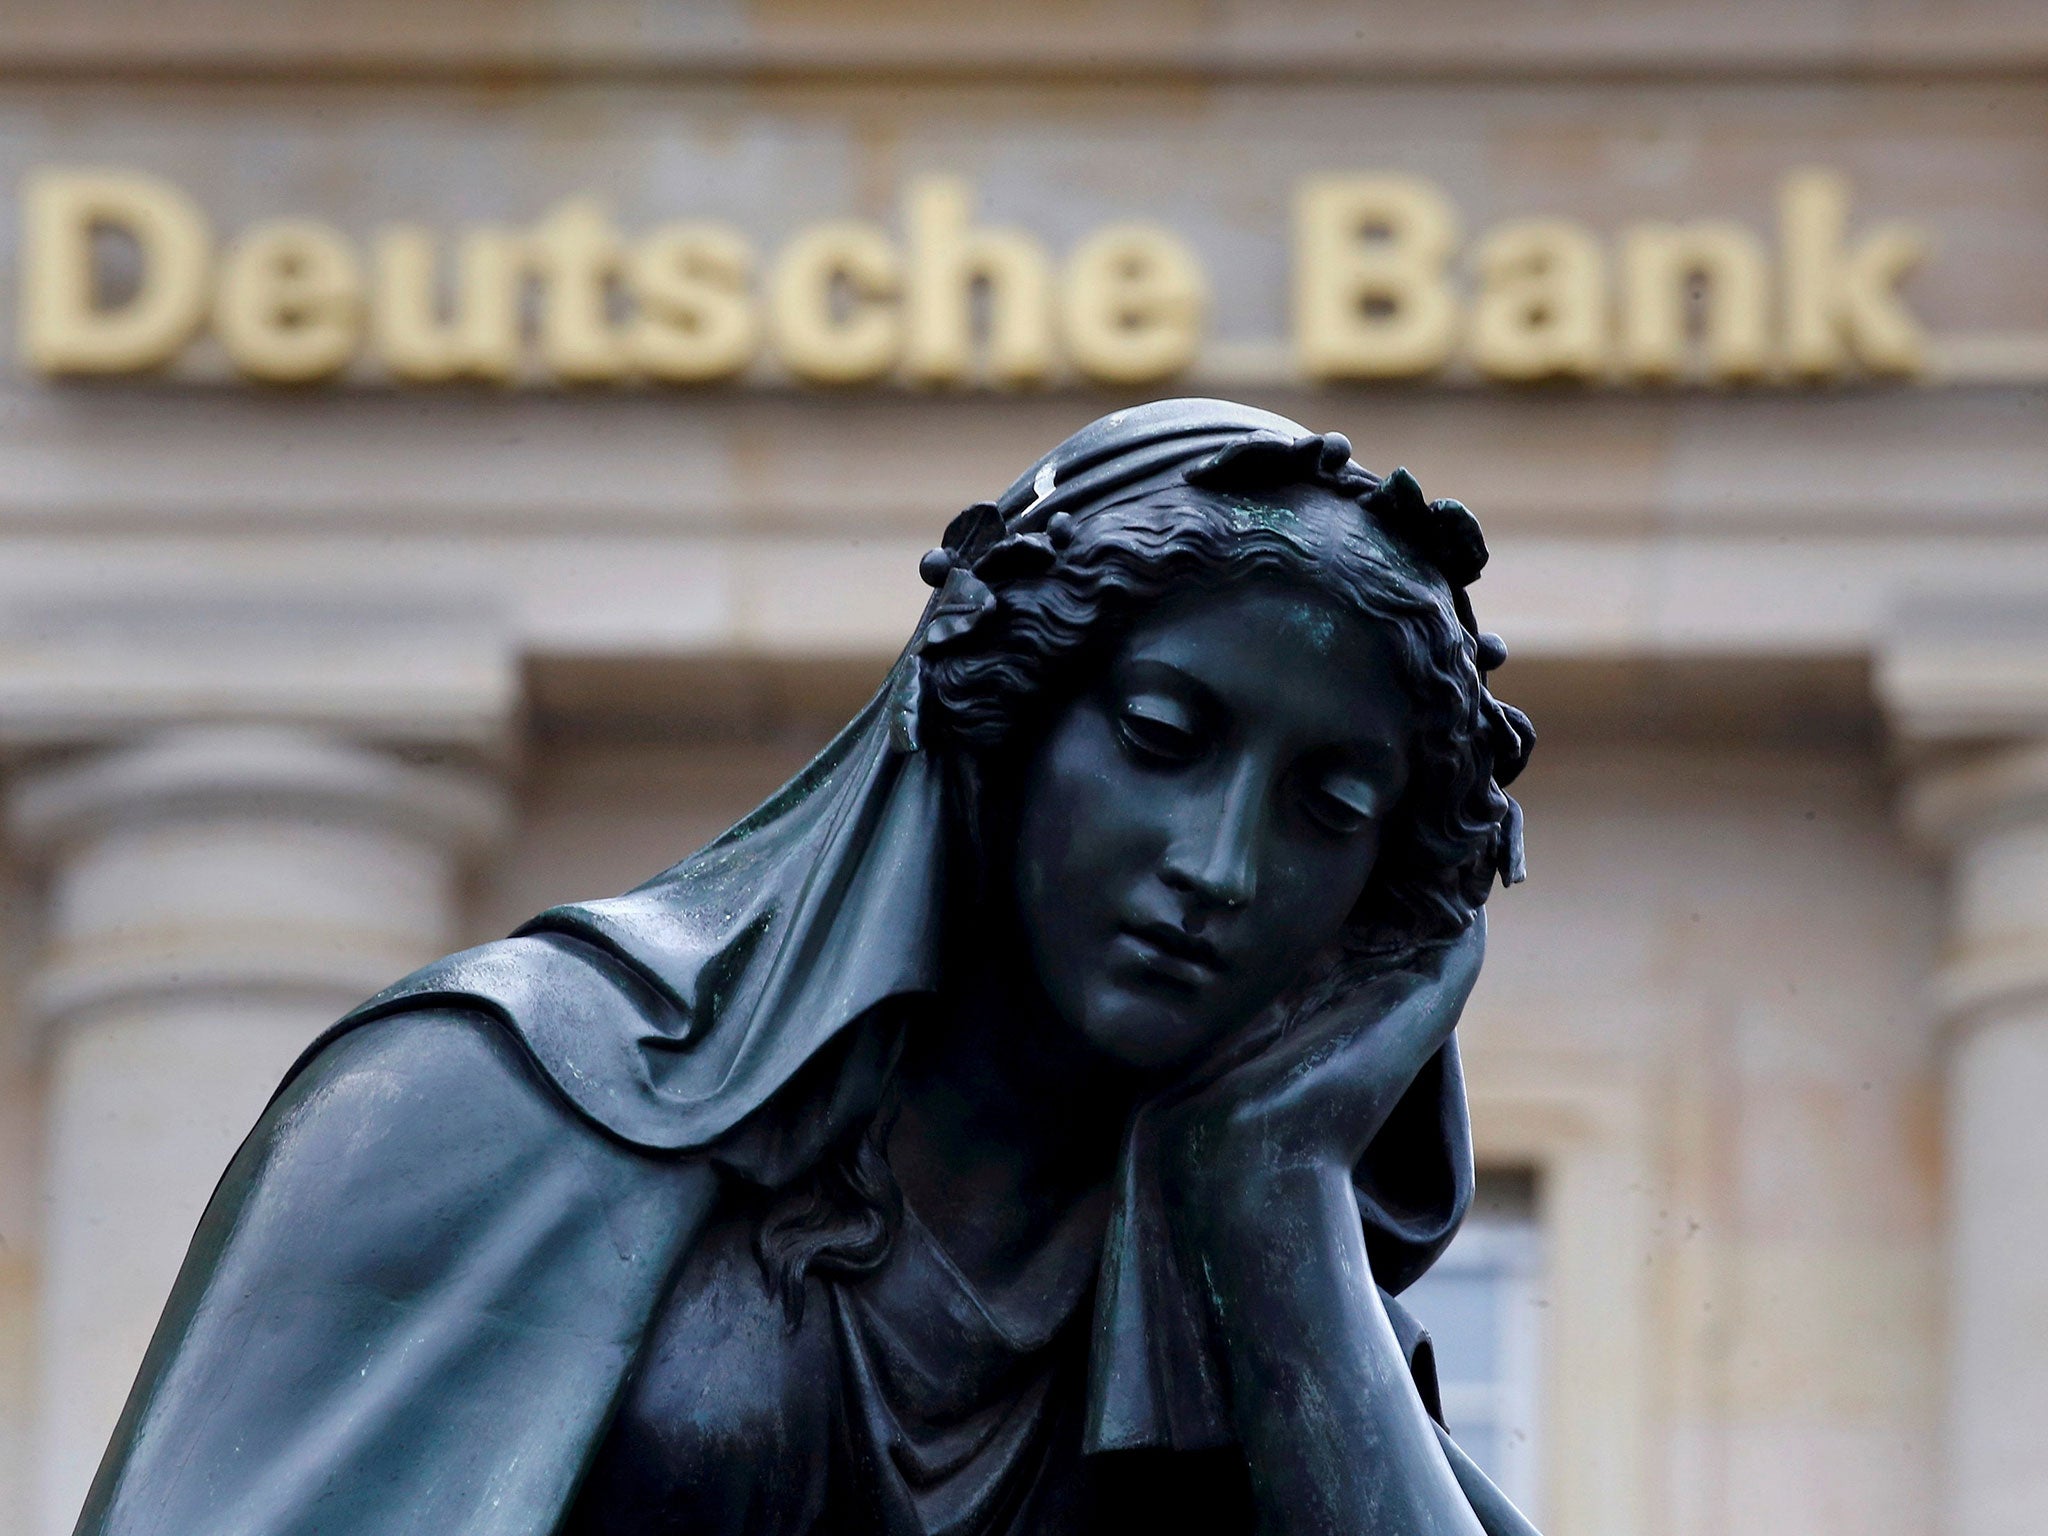 Most of Deutsche Bank's UK staff are based in London